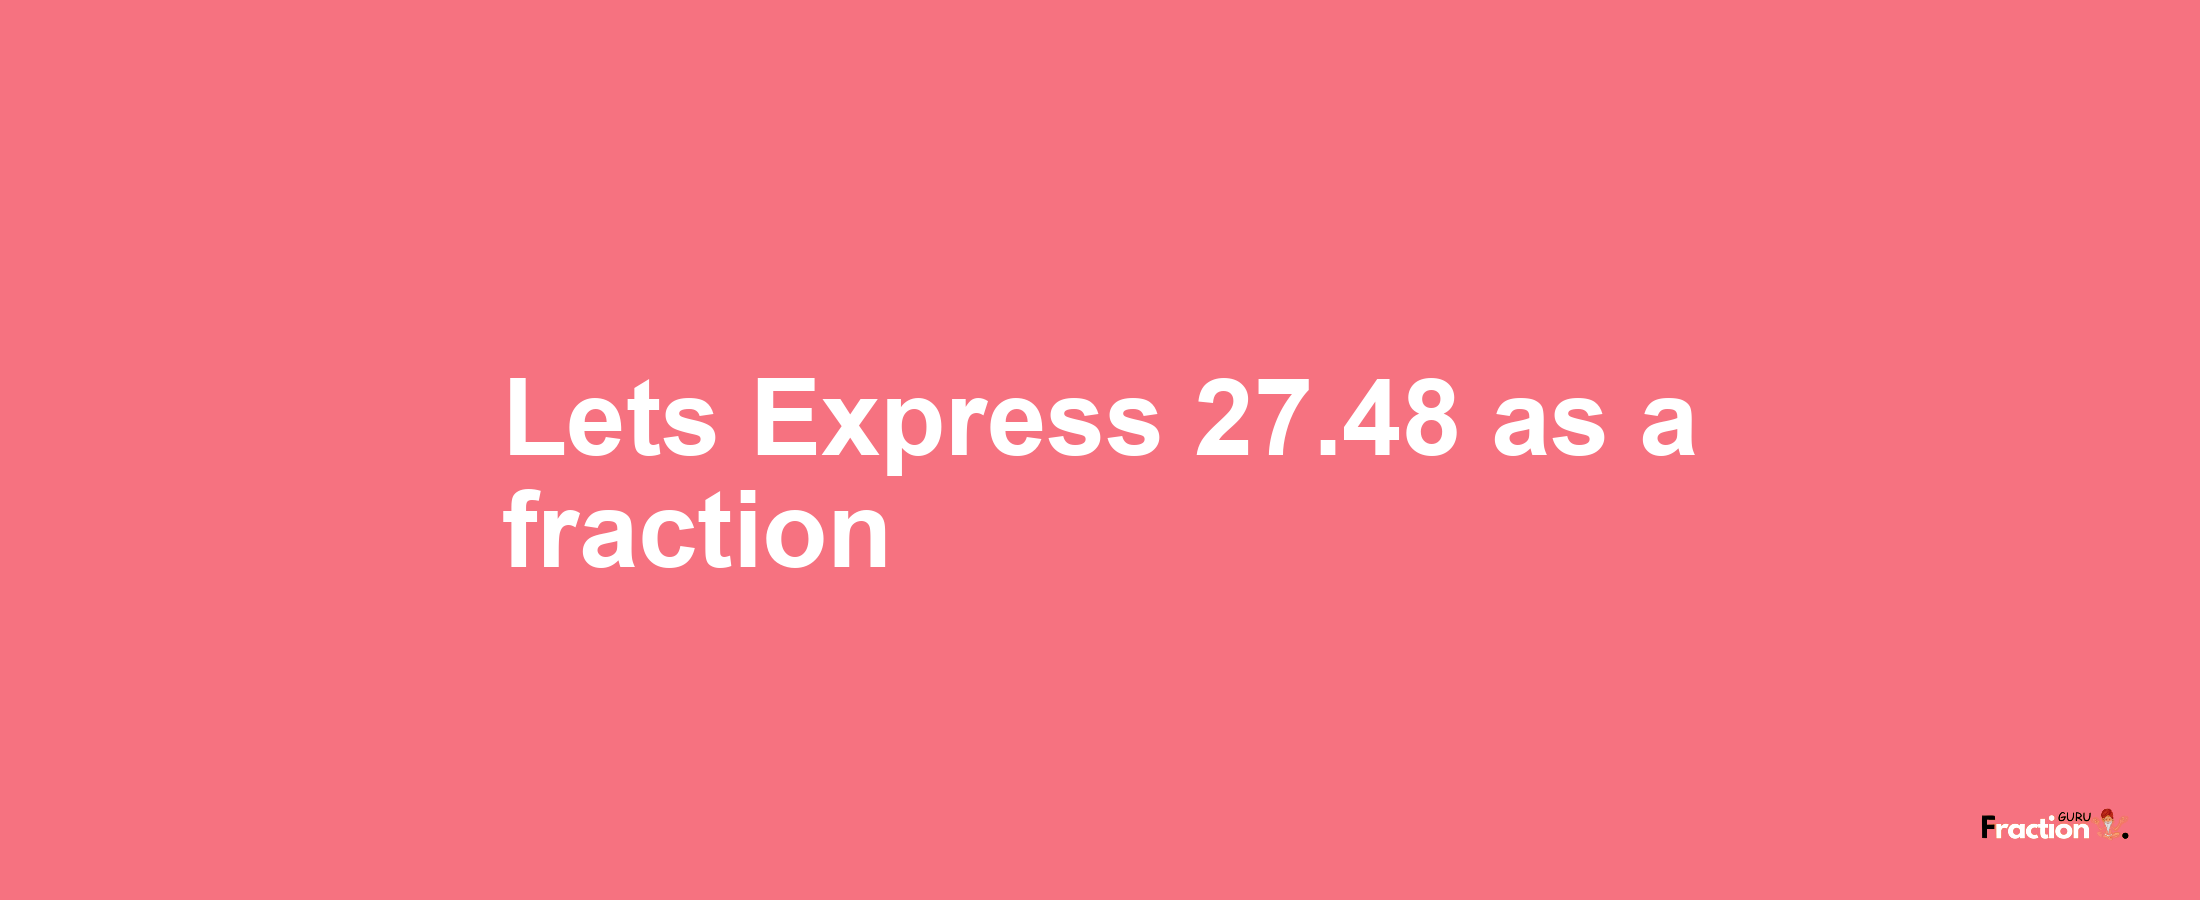 Lets Express 27.48 as afraction